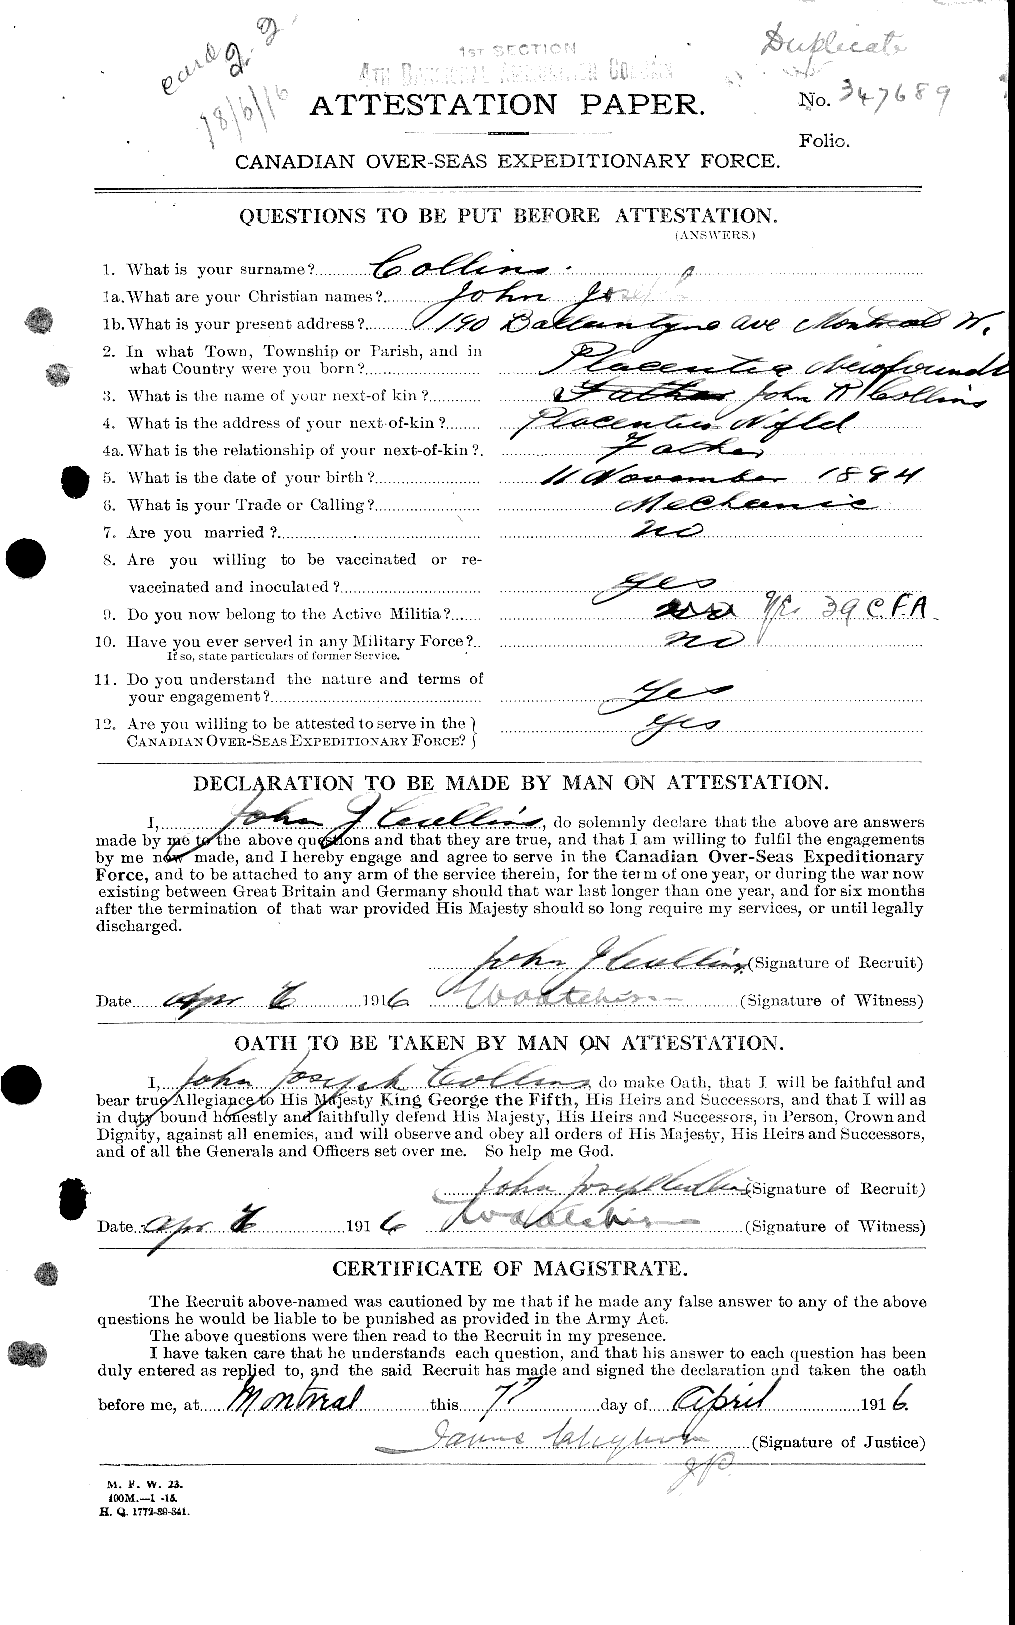 Personnel Records of the First World War - CEF 034365a